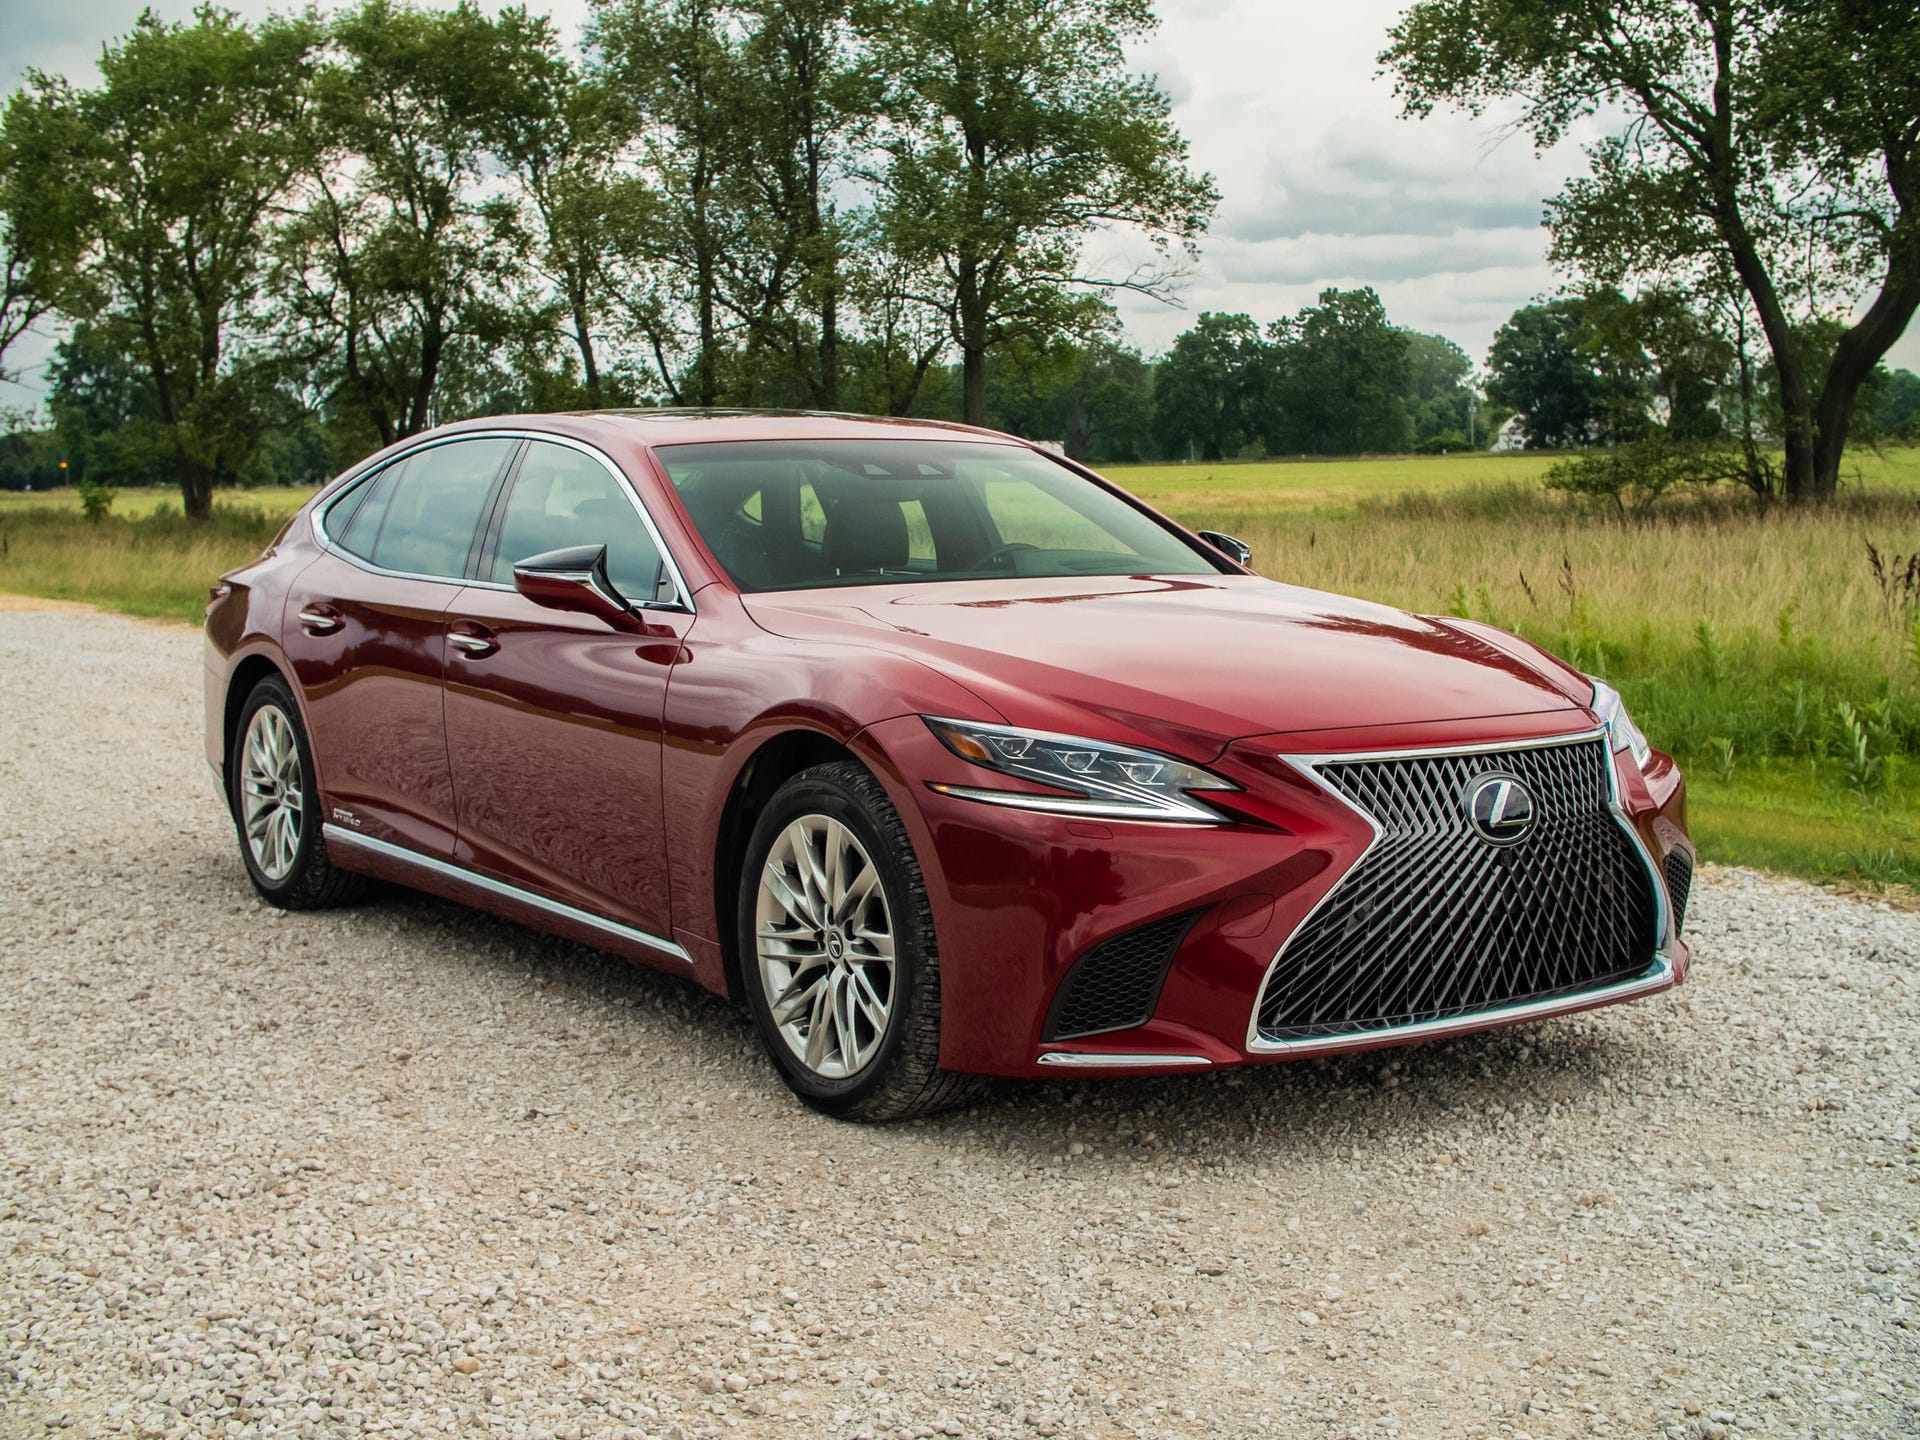 2019 Lexus LS 500h AWD review: Full-size hybrid offers luxury with  tradeoffs - CNET